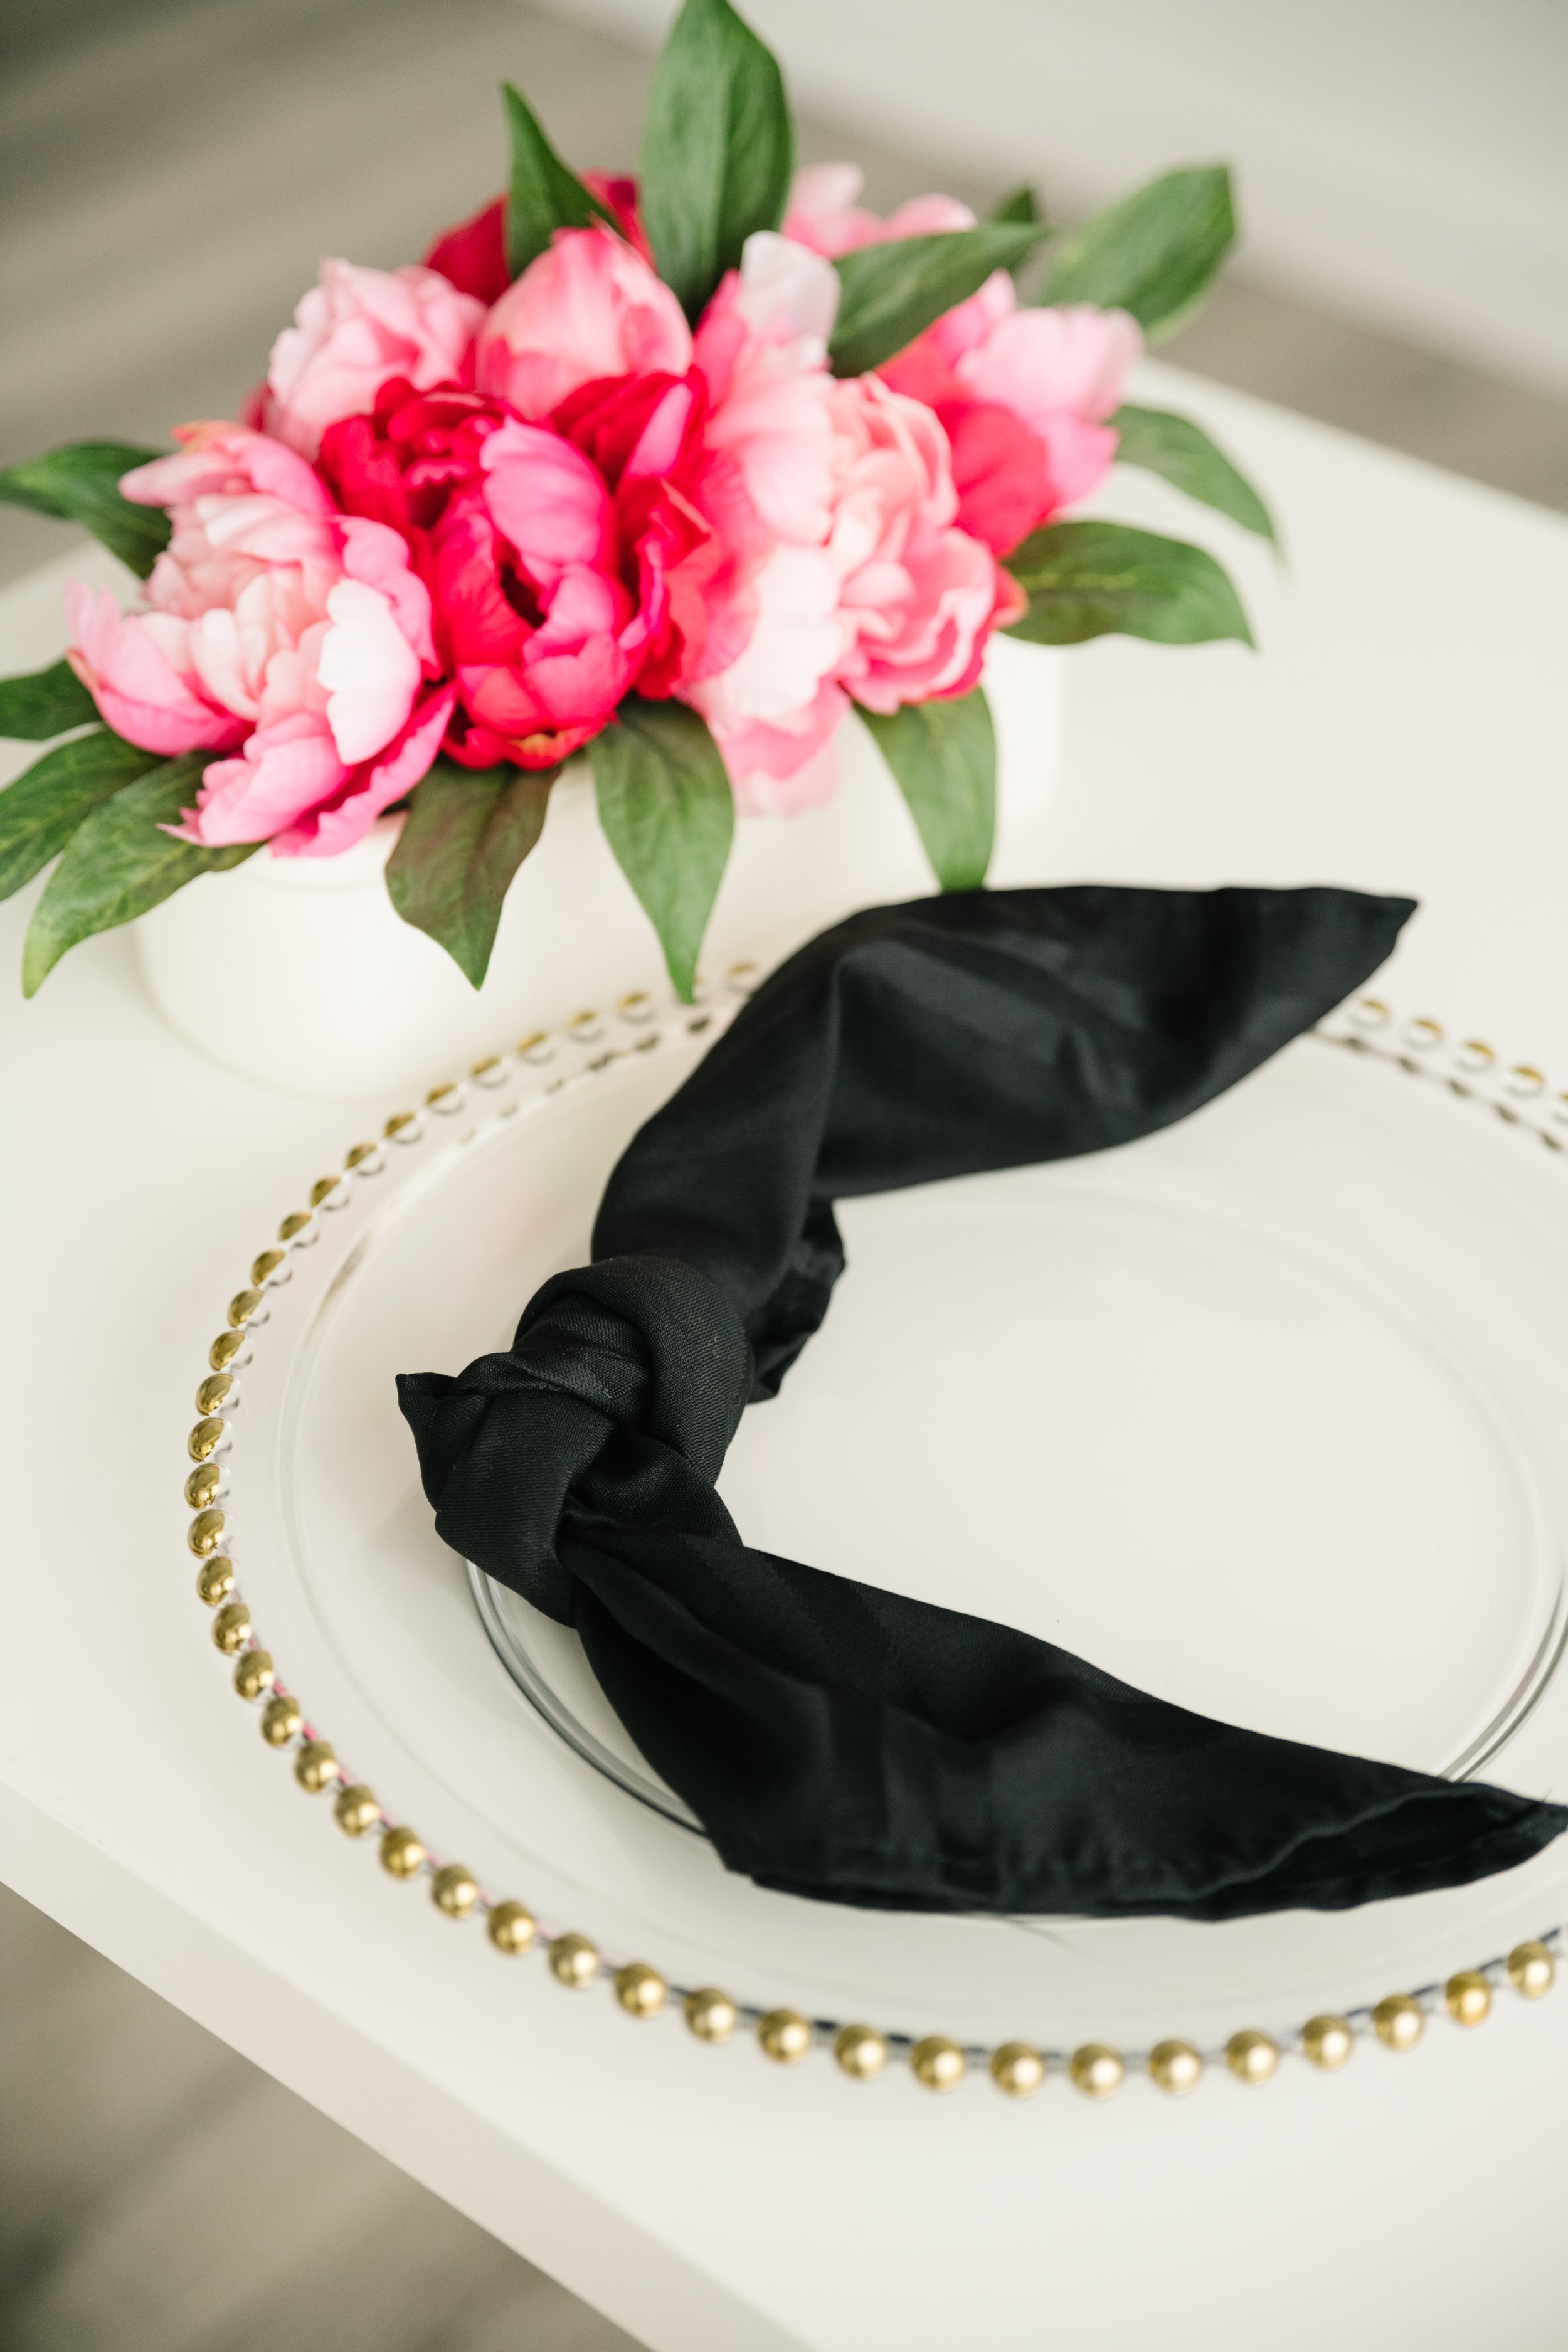 Pink and black wedding tablesetting.jpg